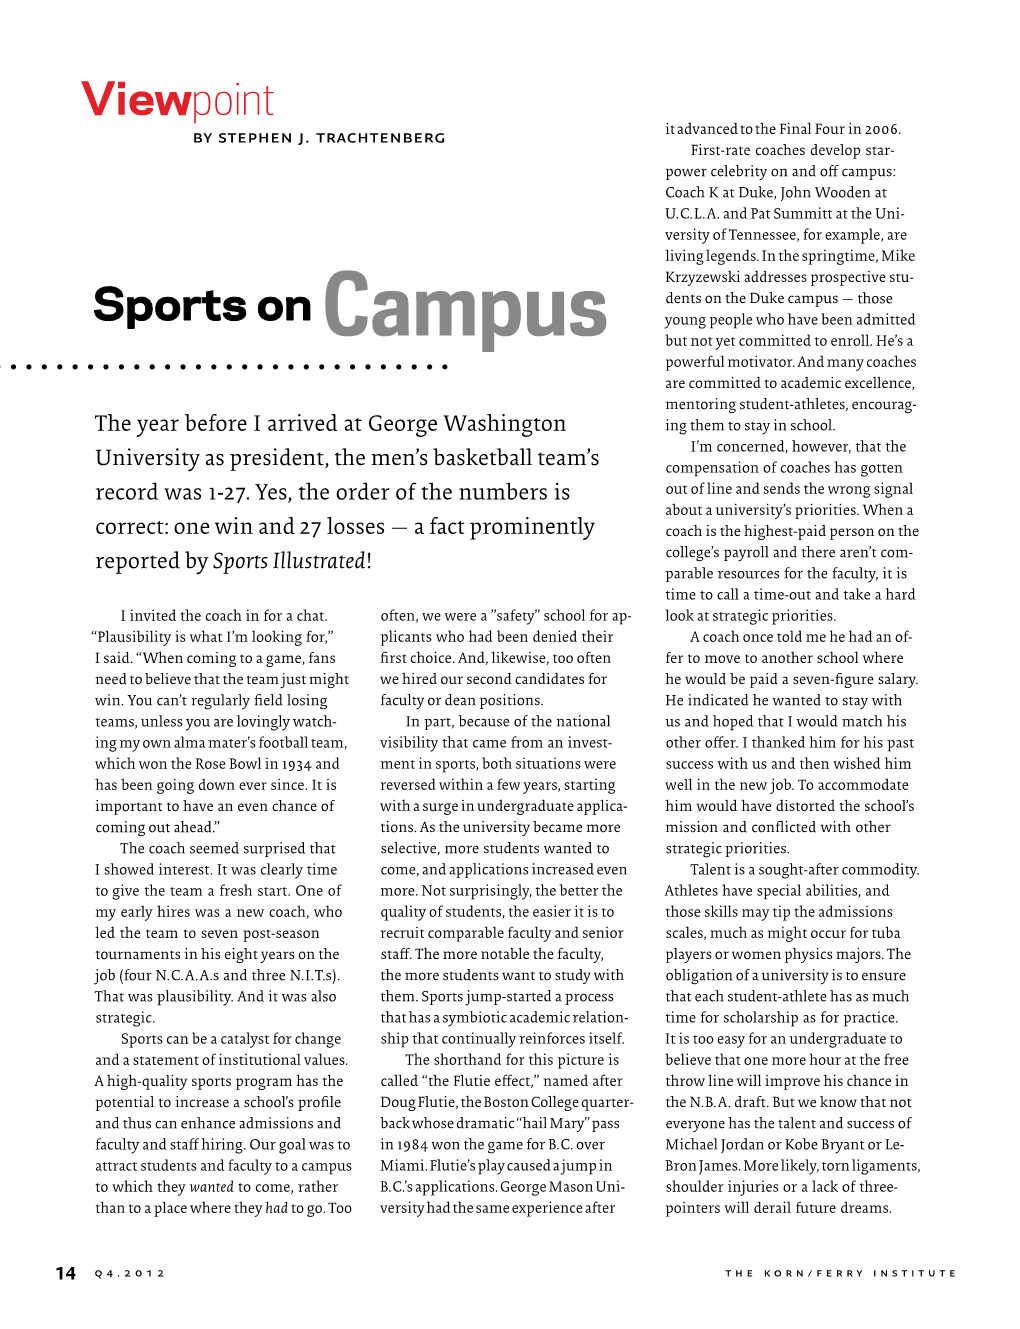 Sports on Campus